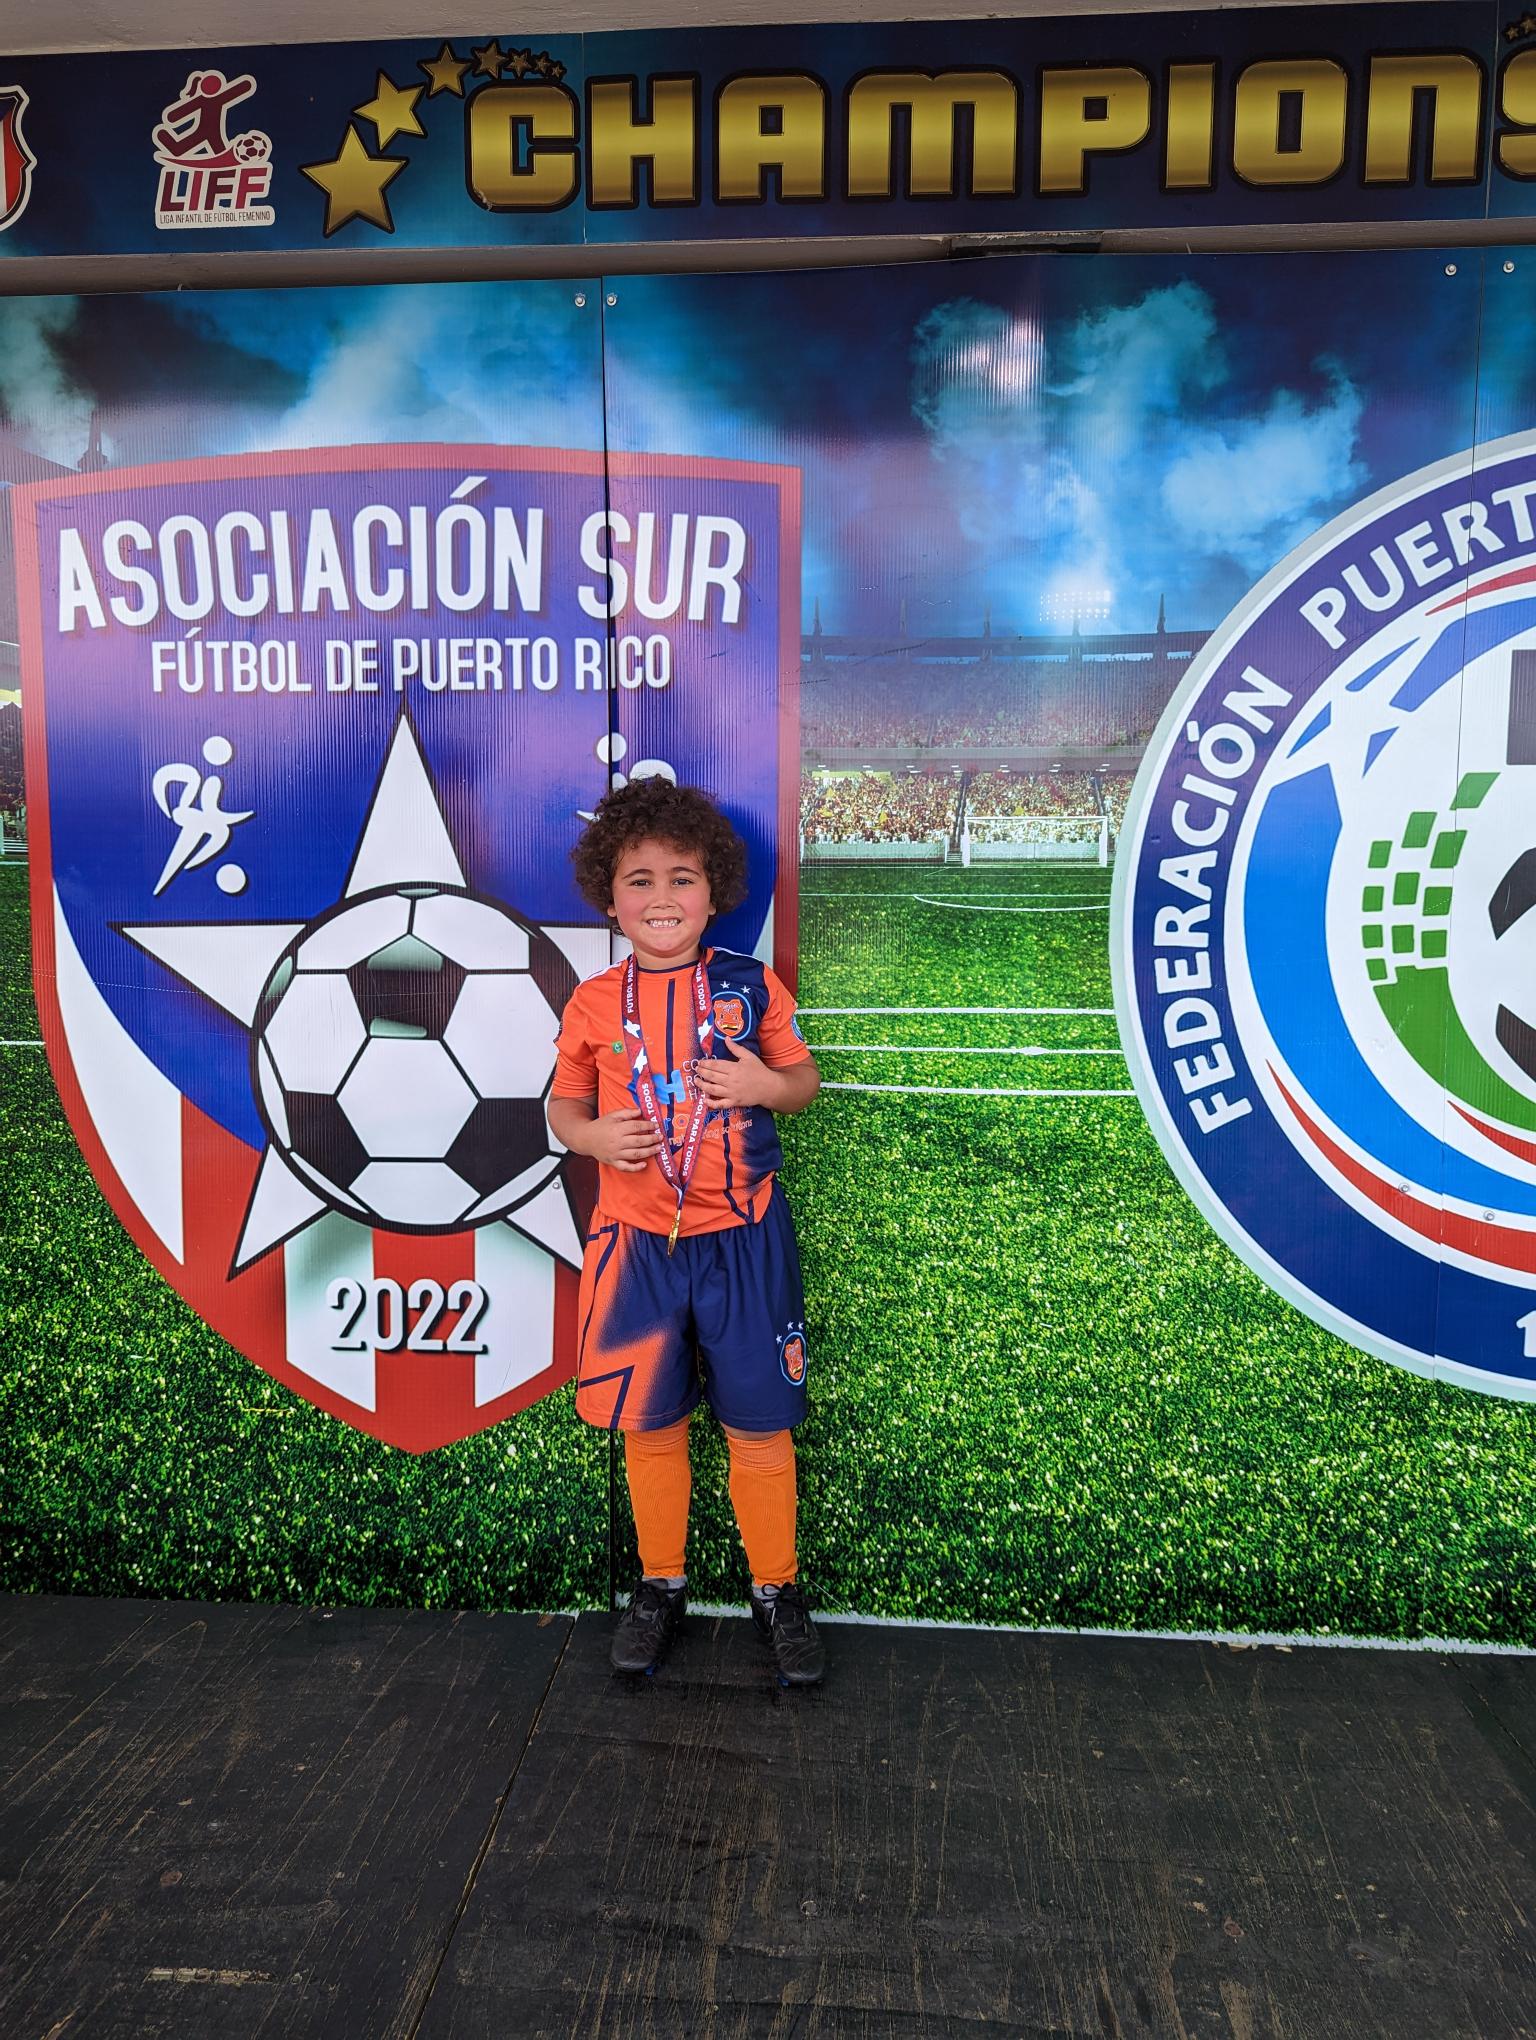 Siblings Esmeralda (8) and Damian (6) from Santa Isabel, Puerto Rico received grants from Our Military Kids to play in their local soccer league. Their father is currently serving in the National Guard.